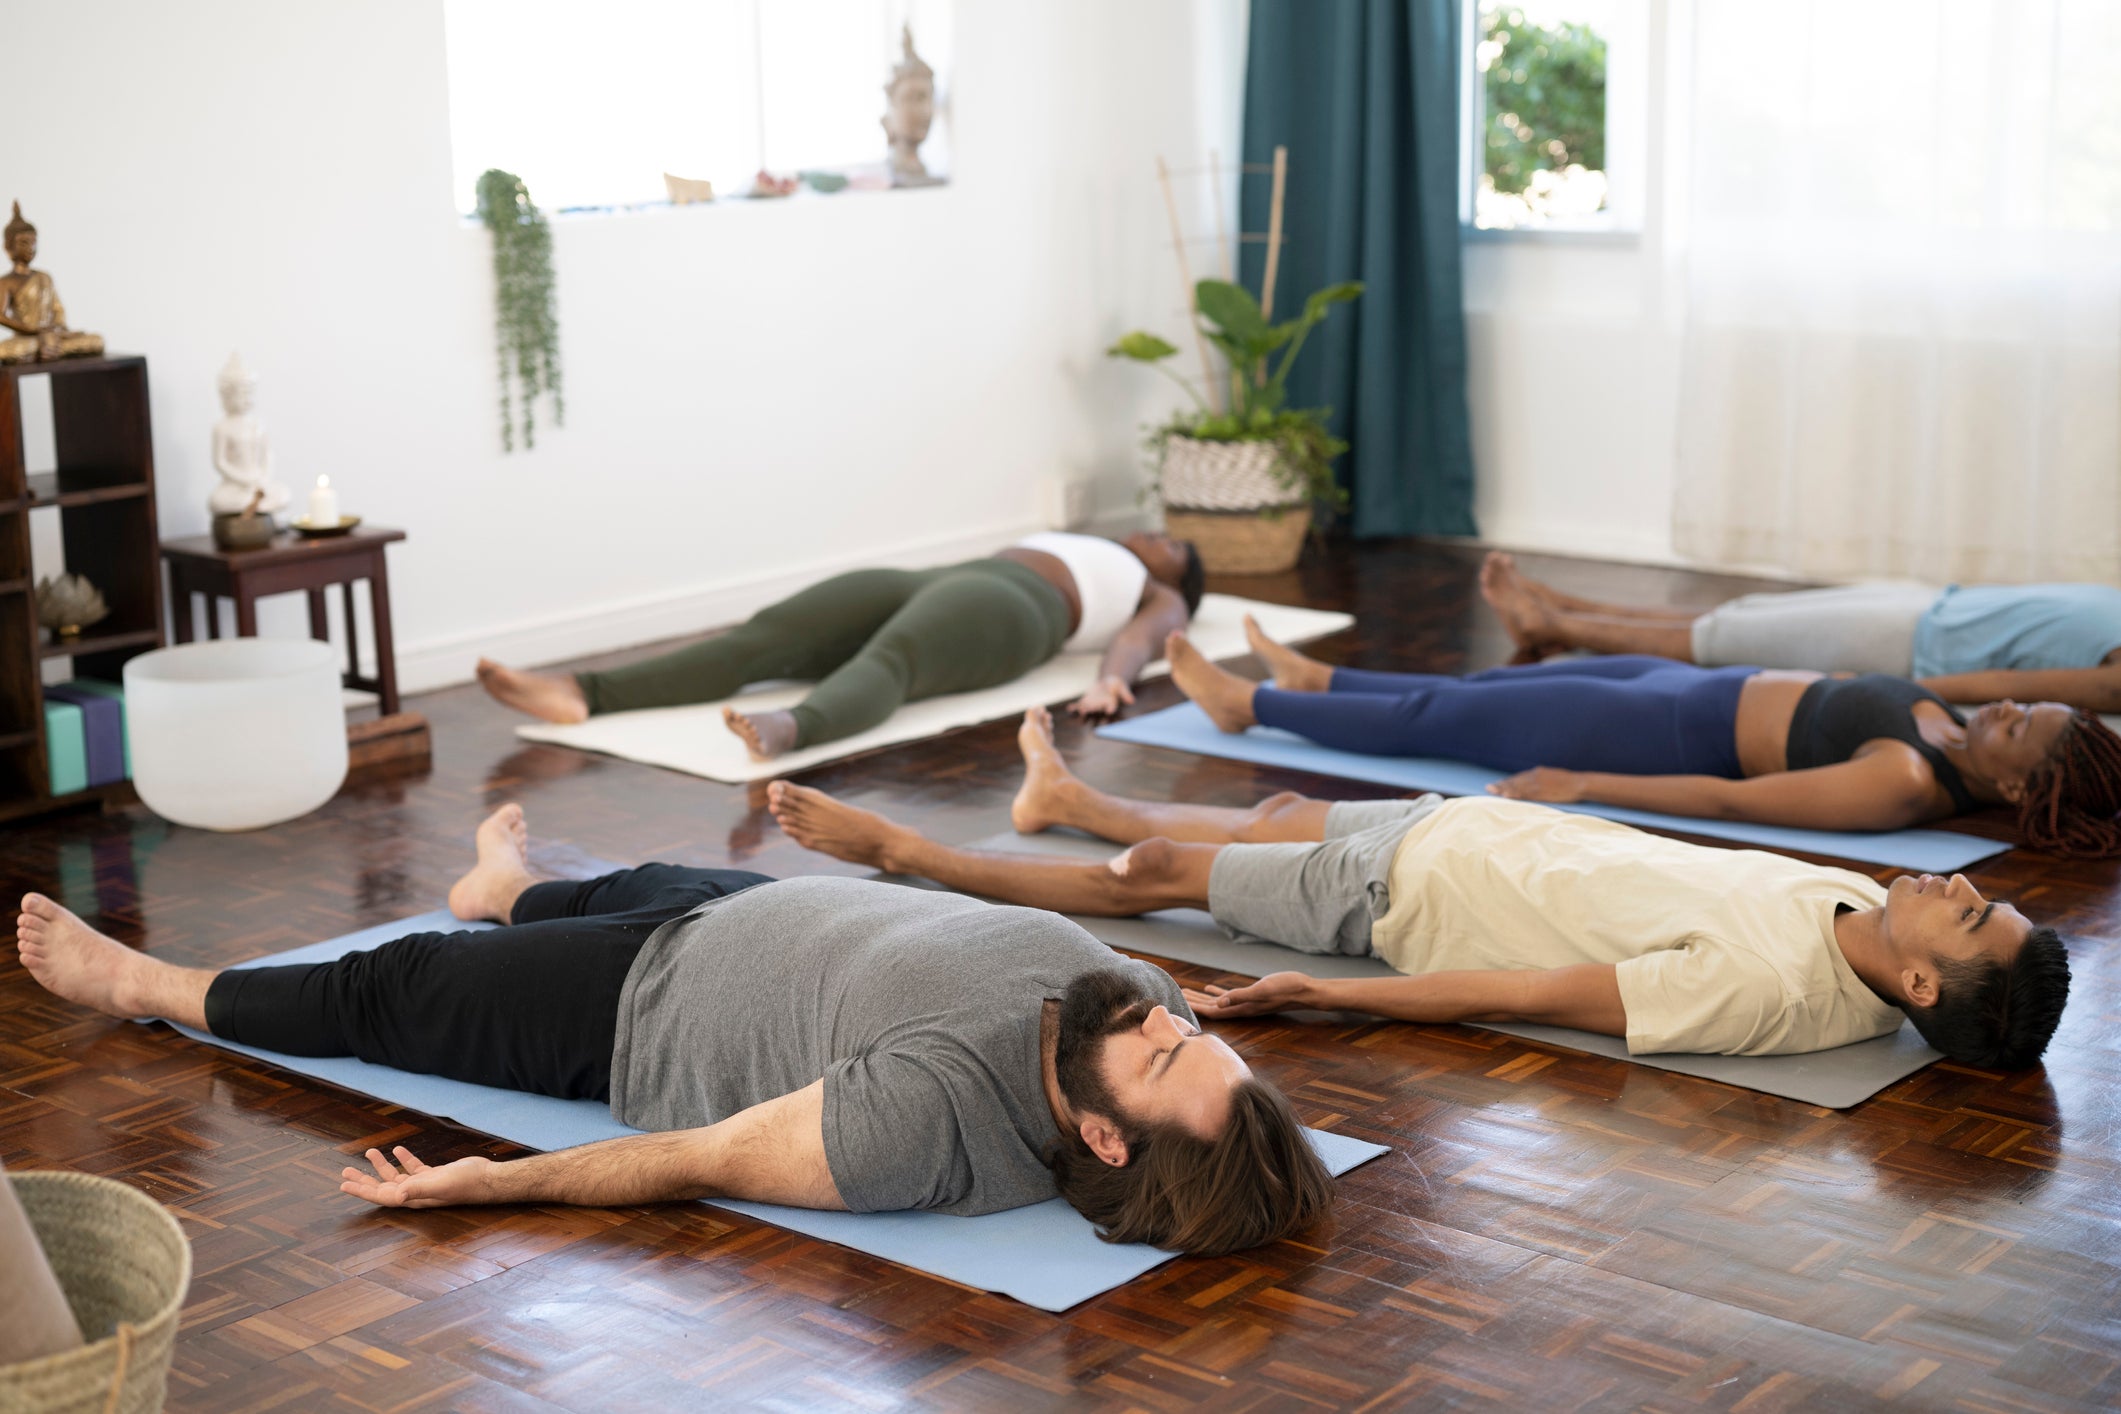 (File image) People lying down in Shavasana at end of yoga class